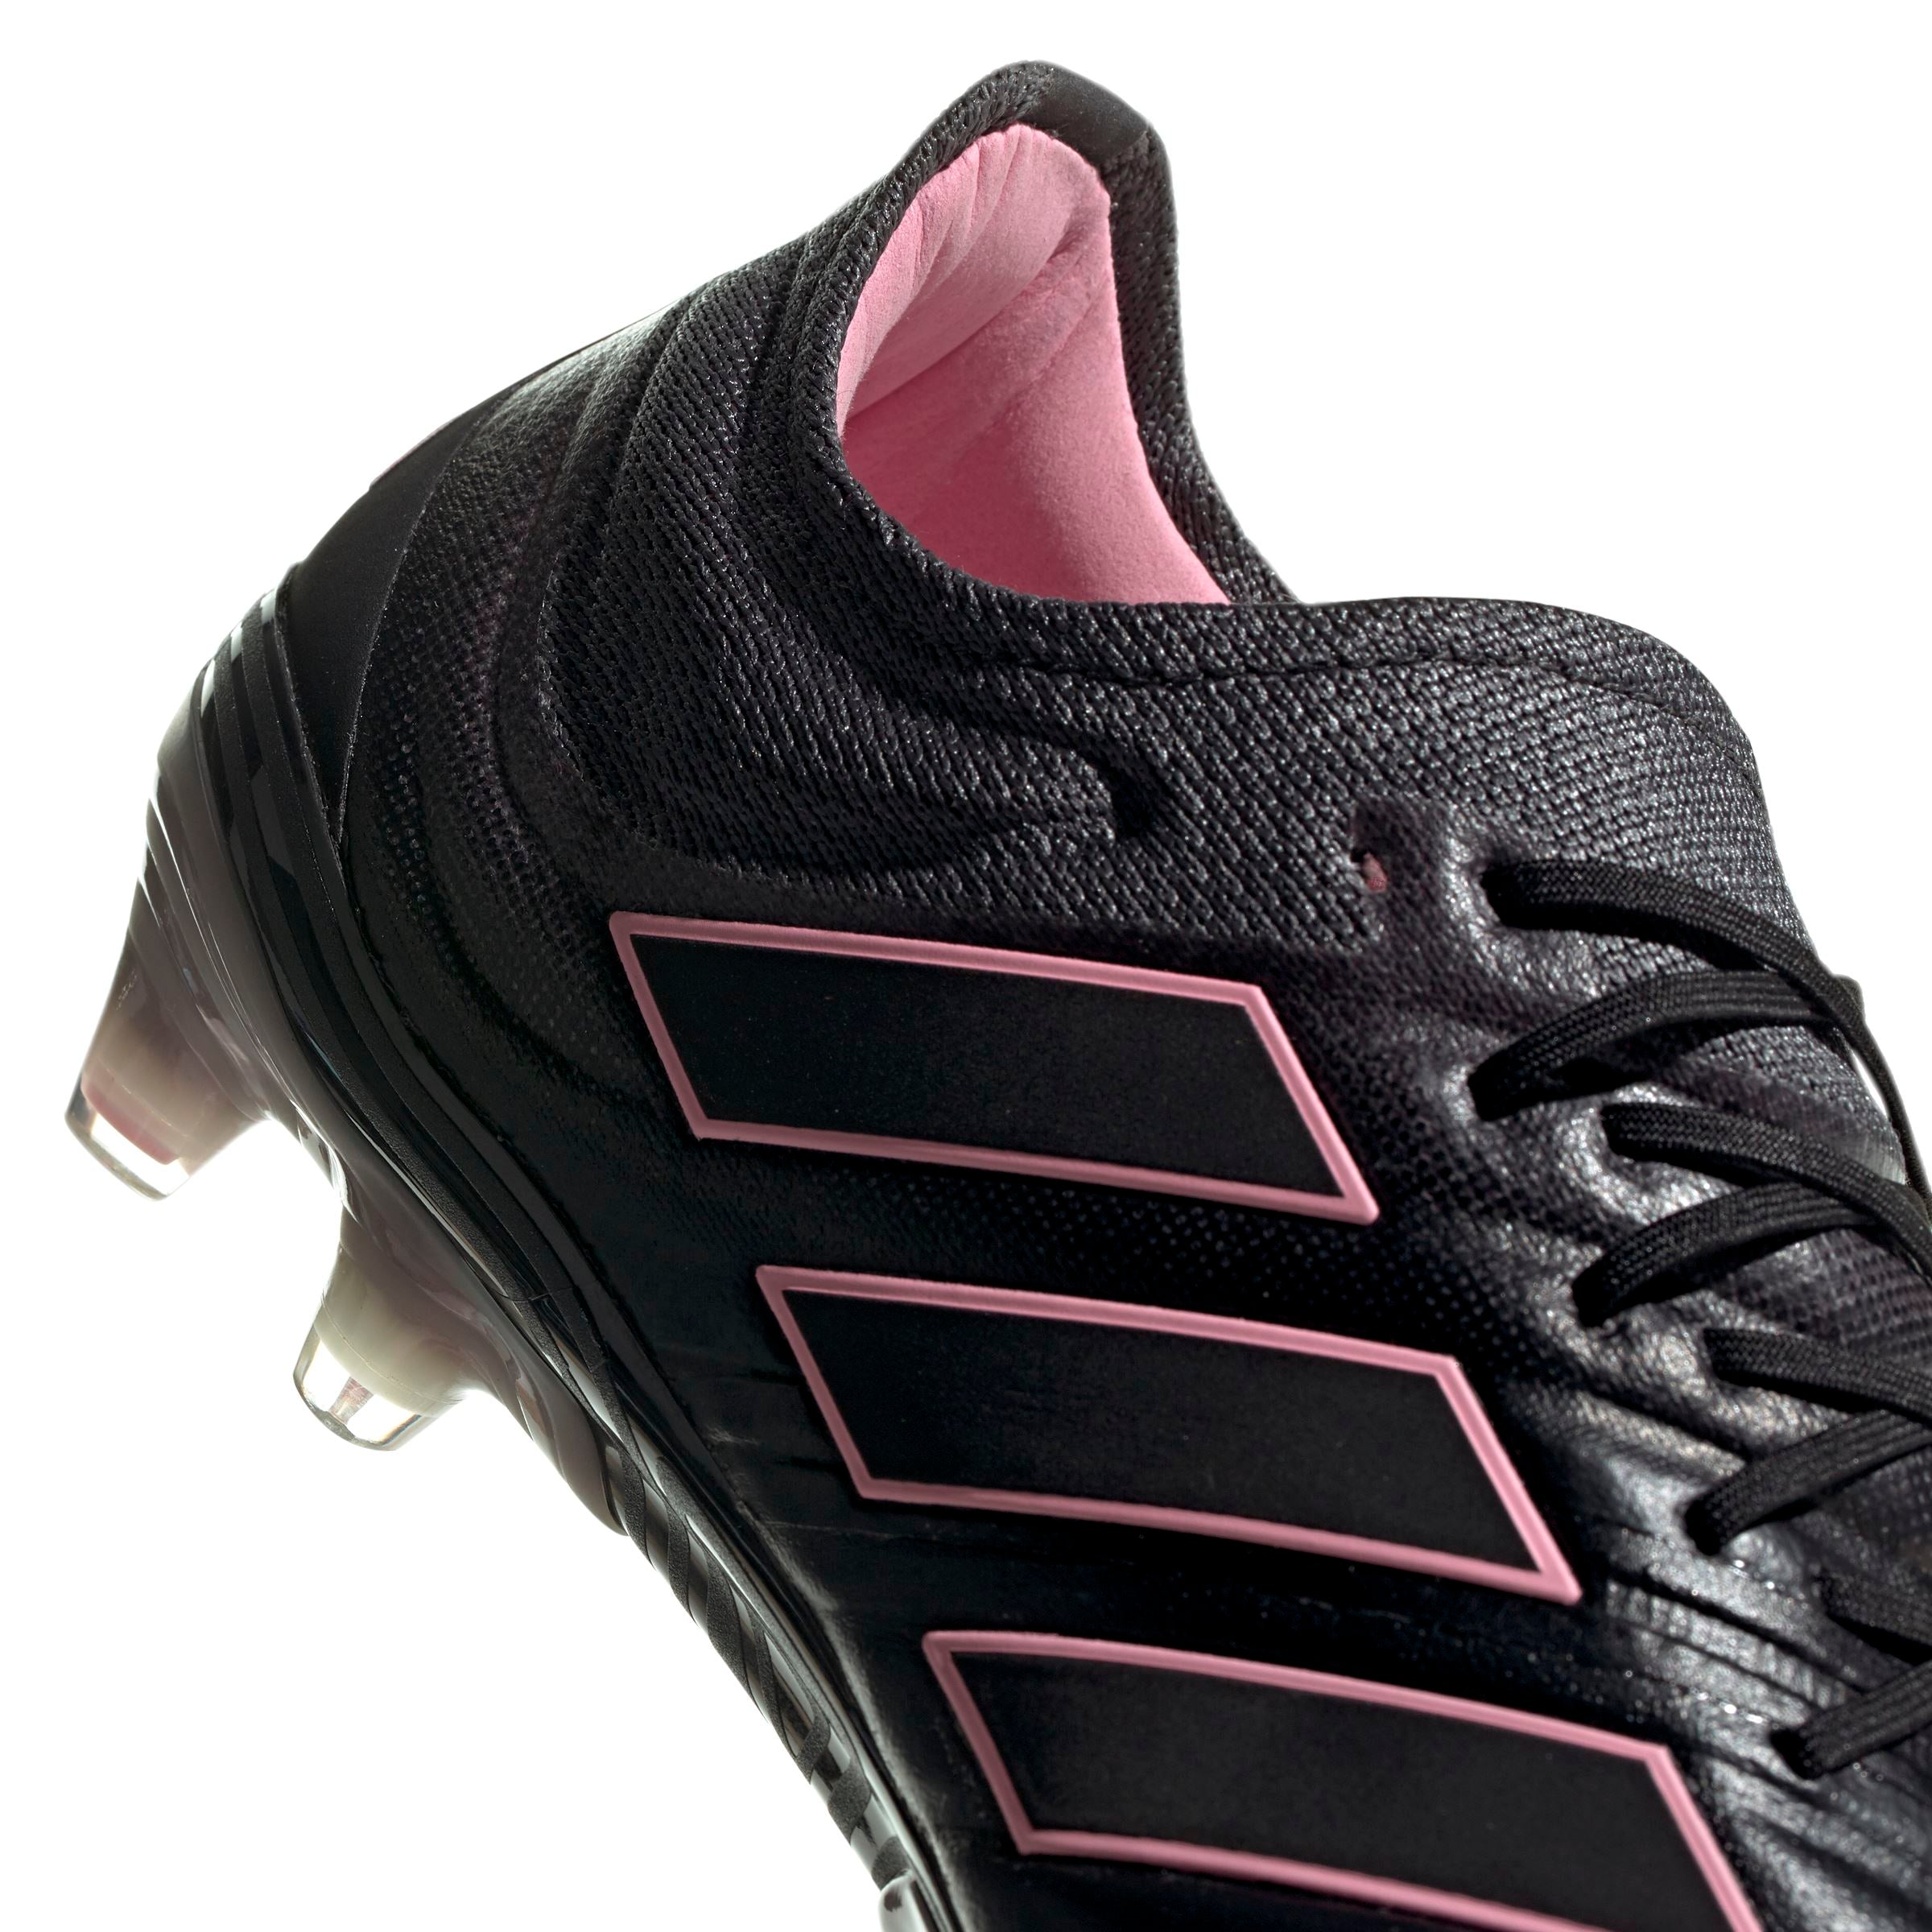 Women's Copa Firm Ground Cleats | F97641